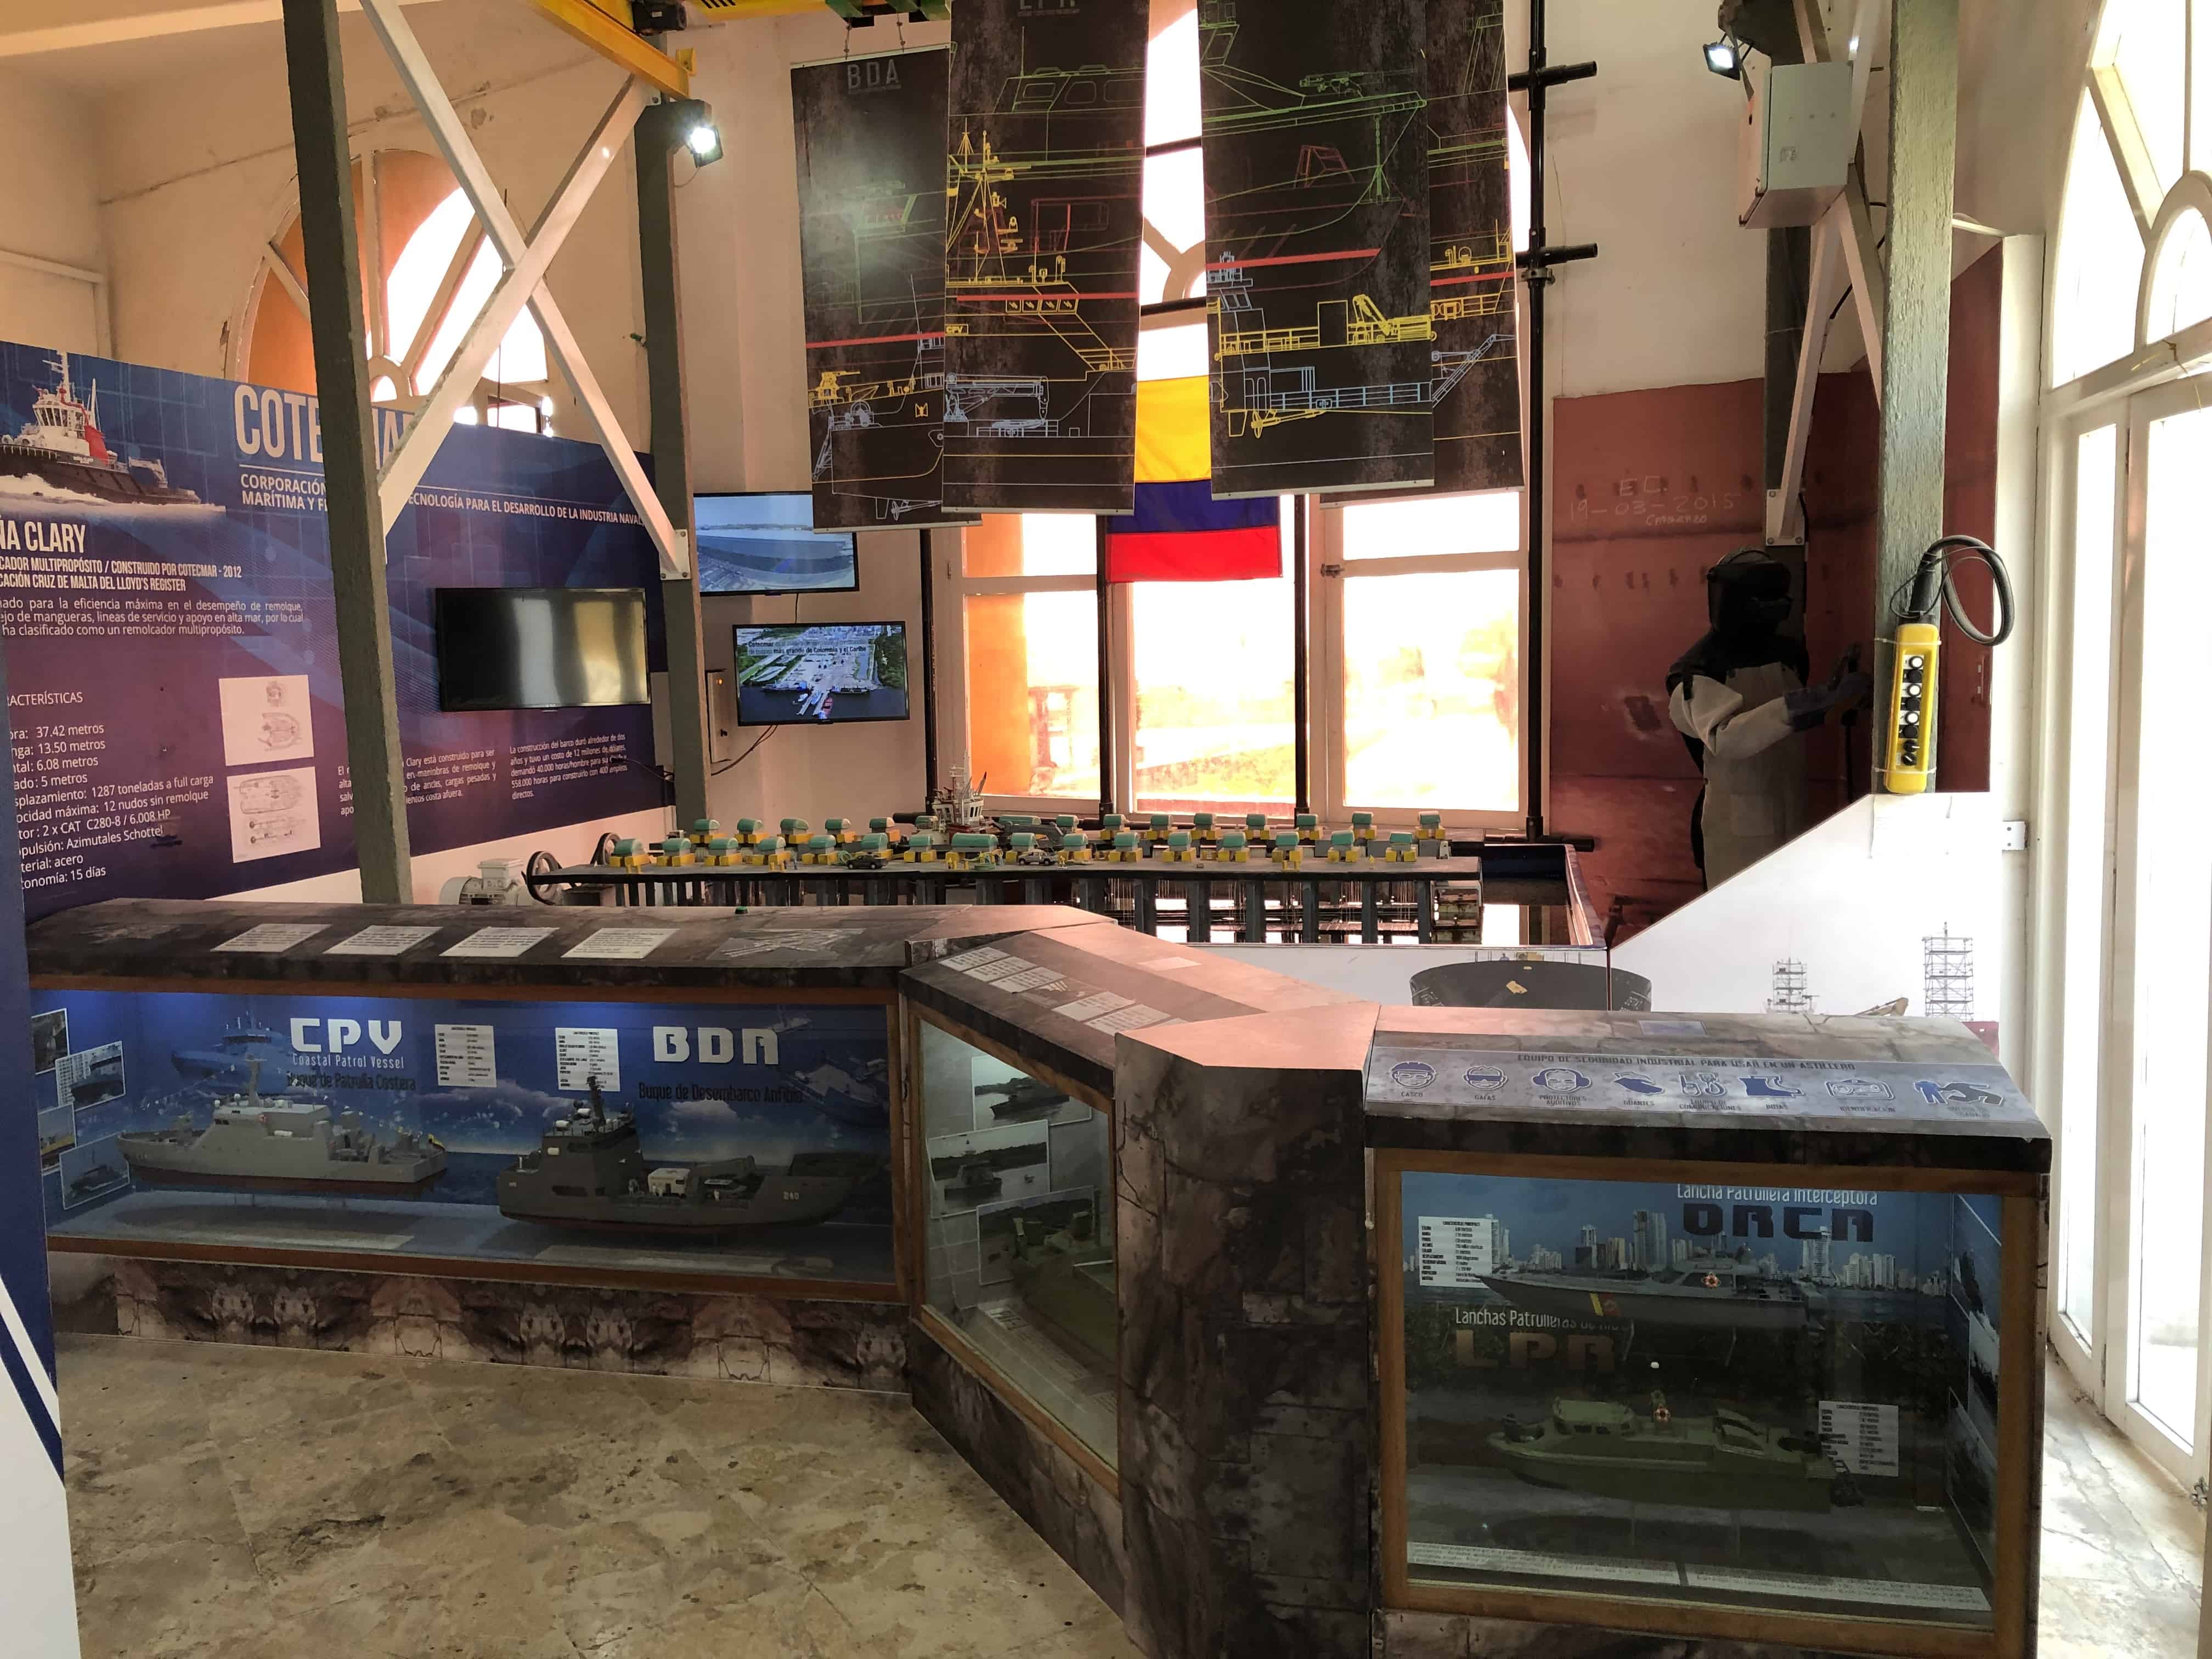 Dry dock model at the Caribbean Naval Museum in Cartagena, Colombia